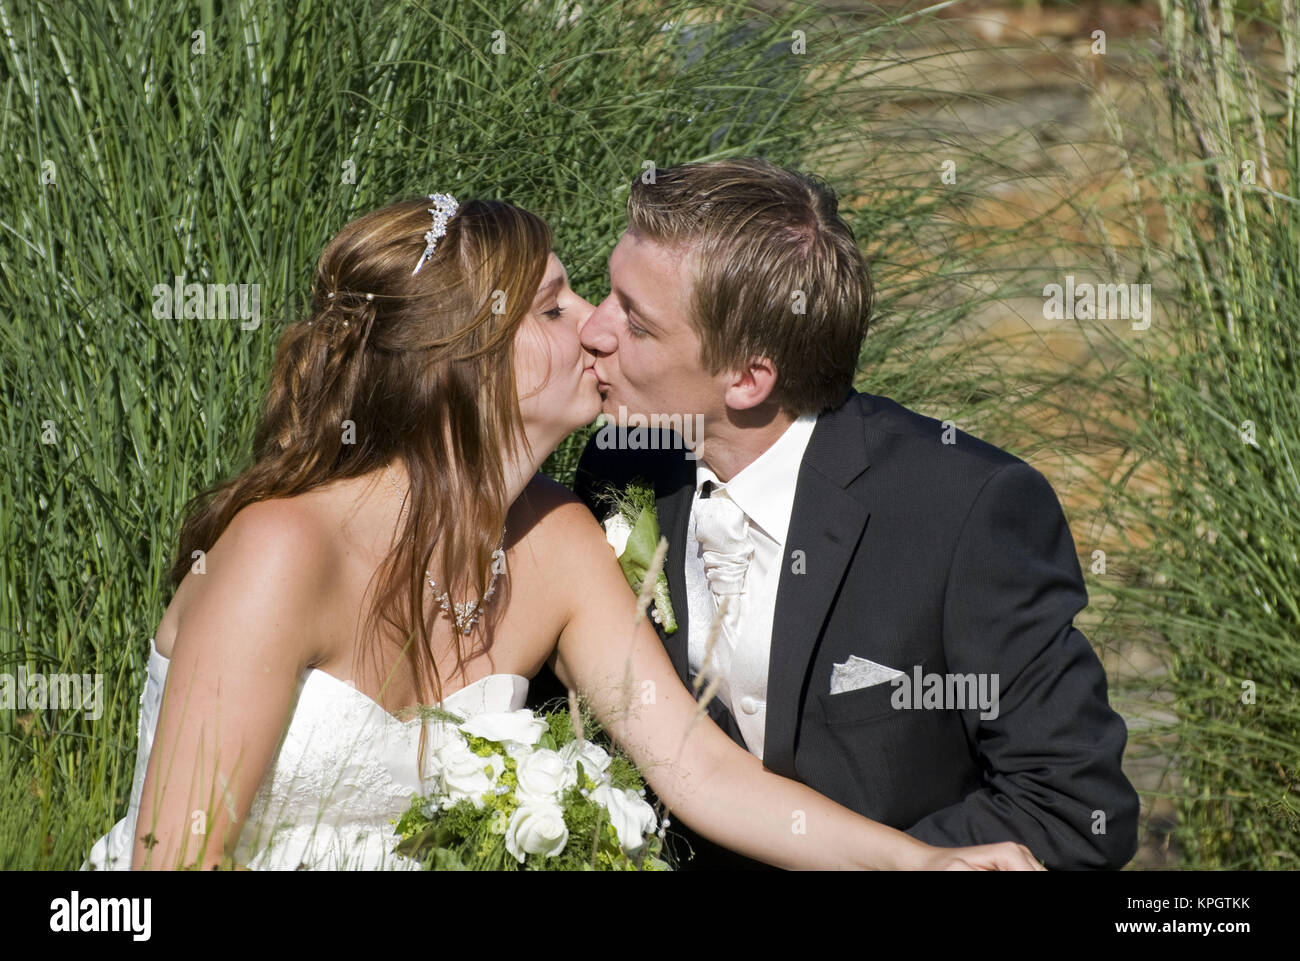 Model released , Junges Brautpaar - young bridal couple Stock Photo